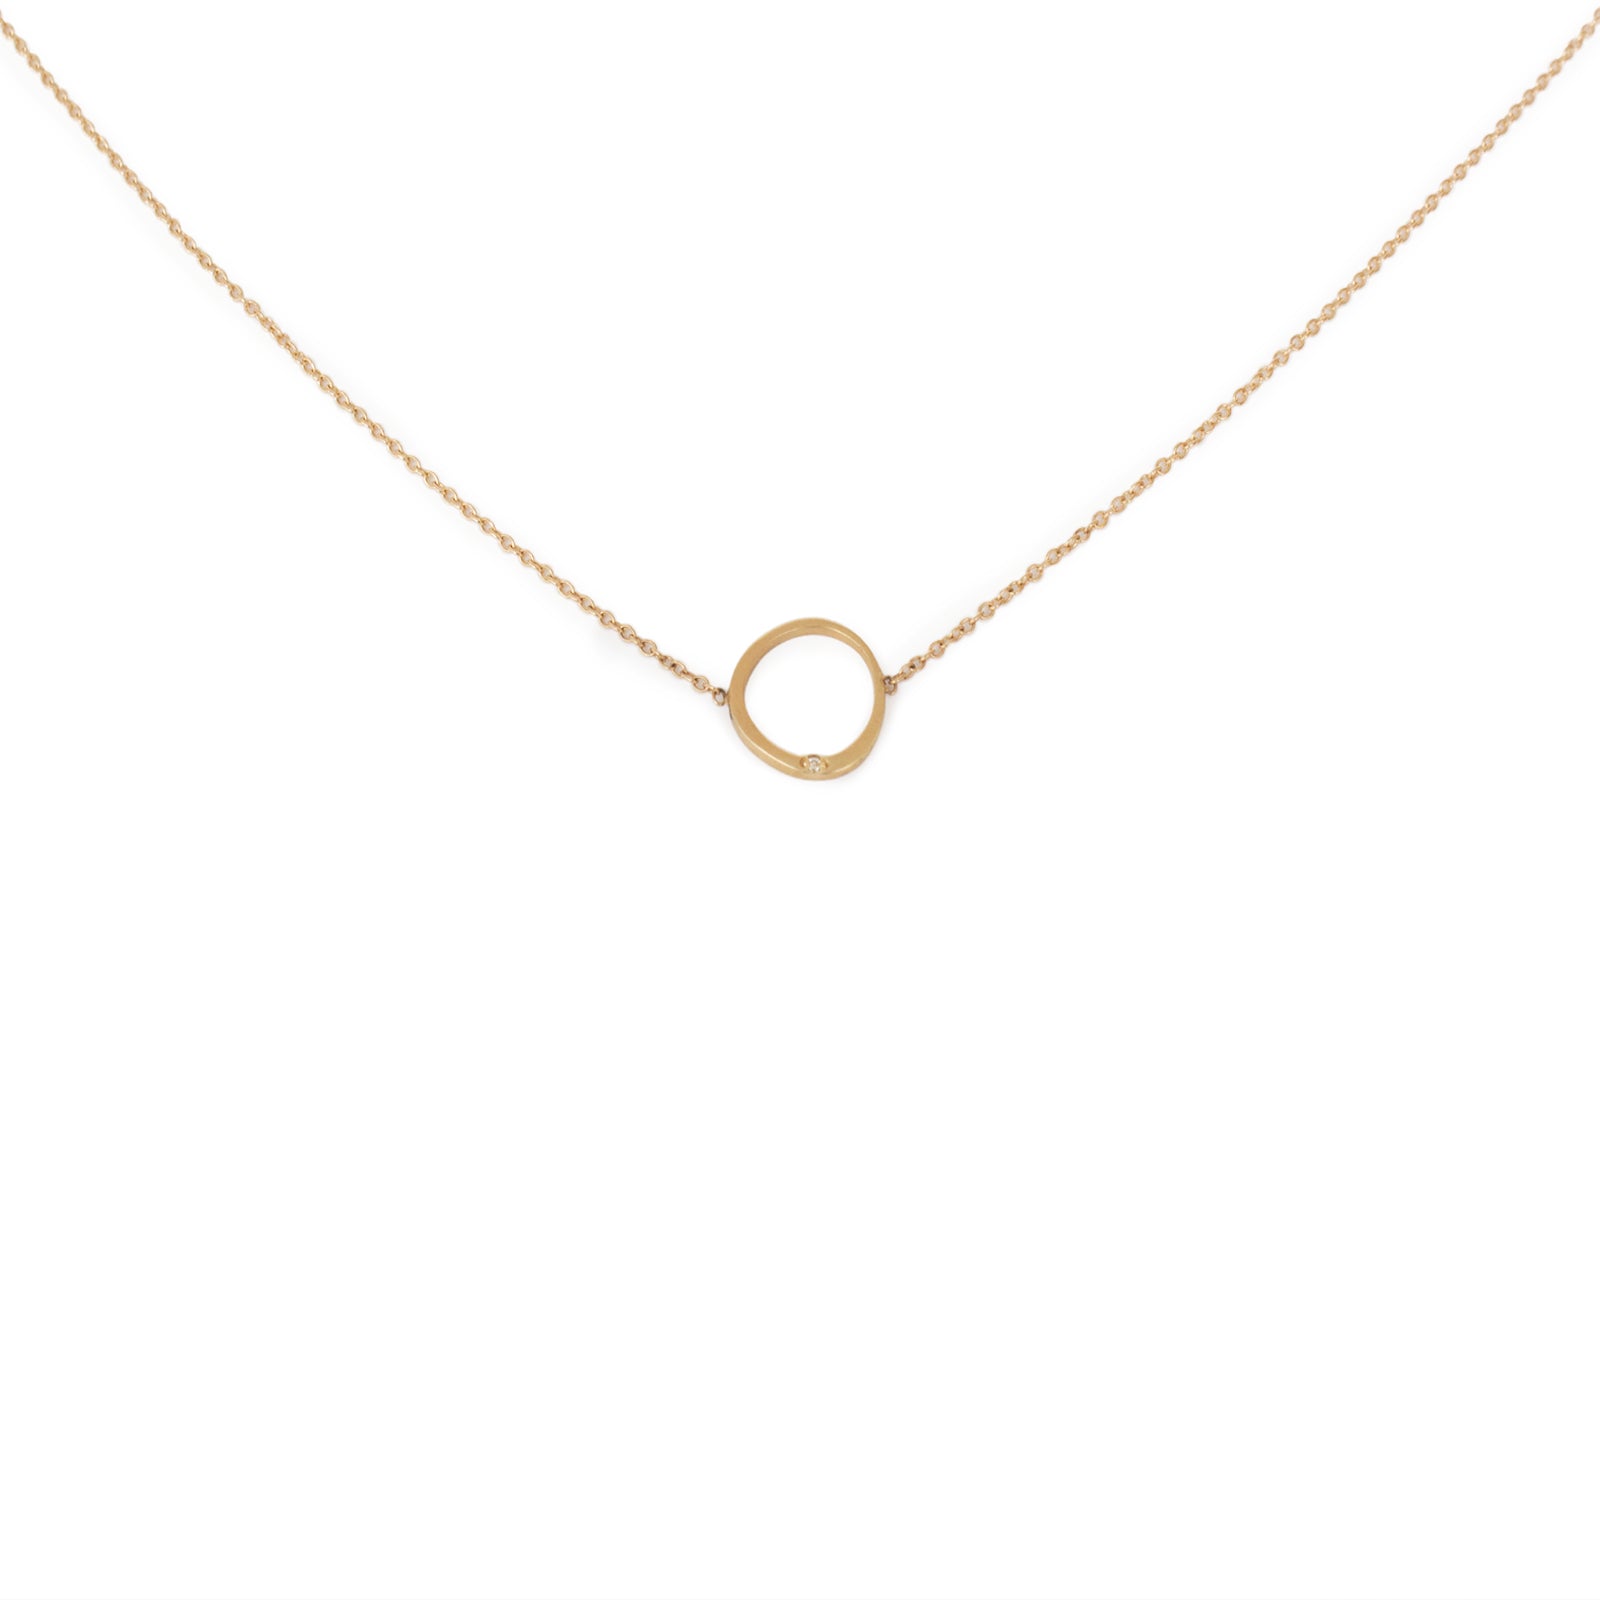 14k yellow gold with white diamond/14k yellow gold chain offset circle necklace